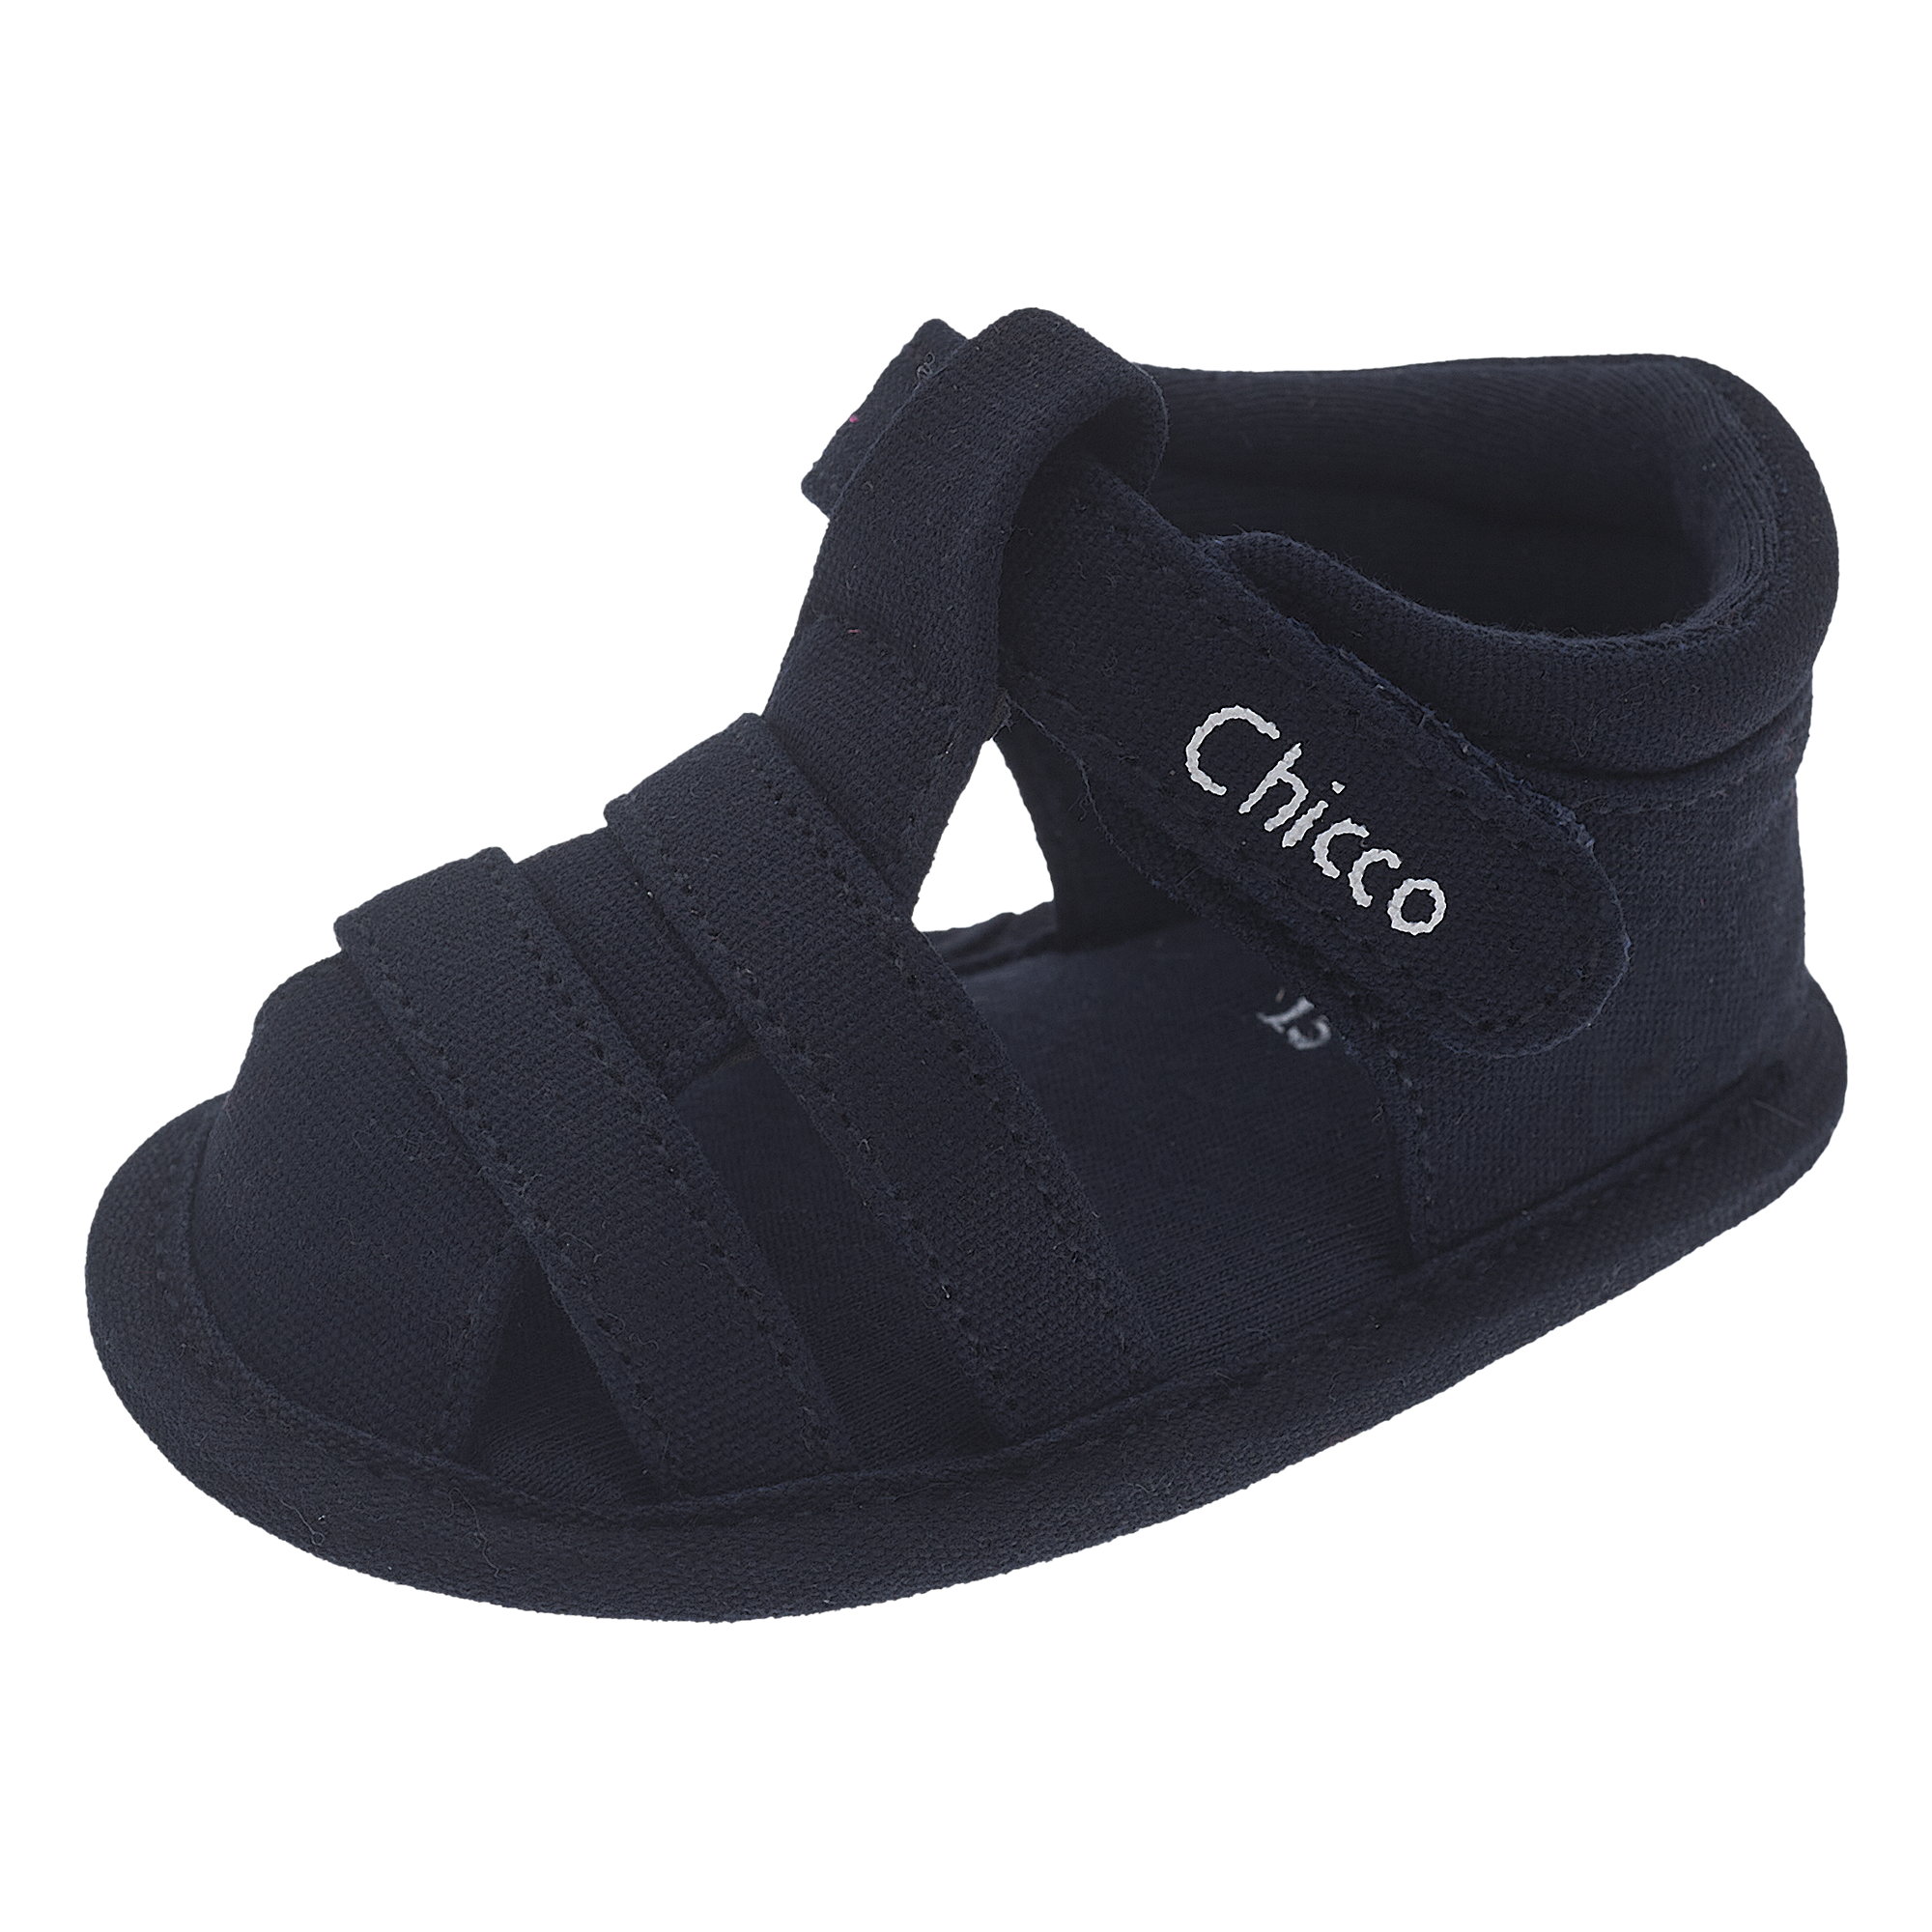 Chicco sandalo owes - Chicco